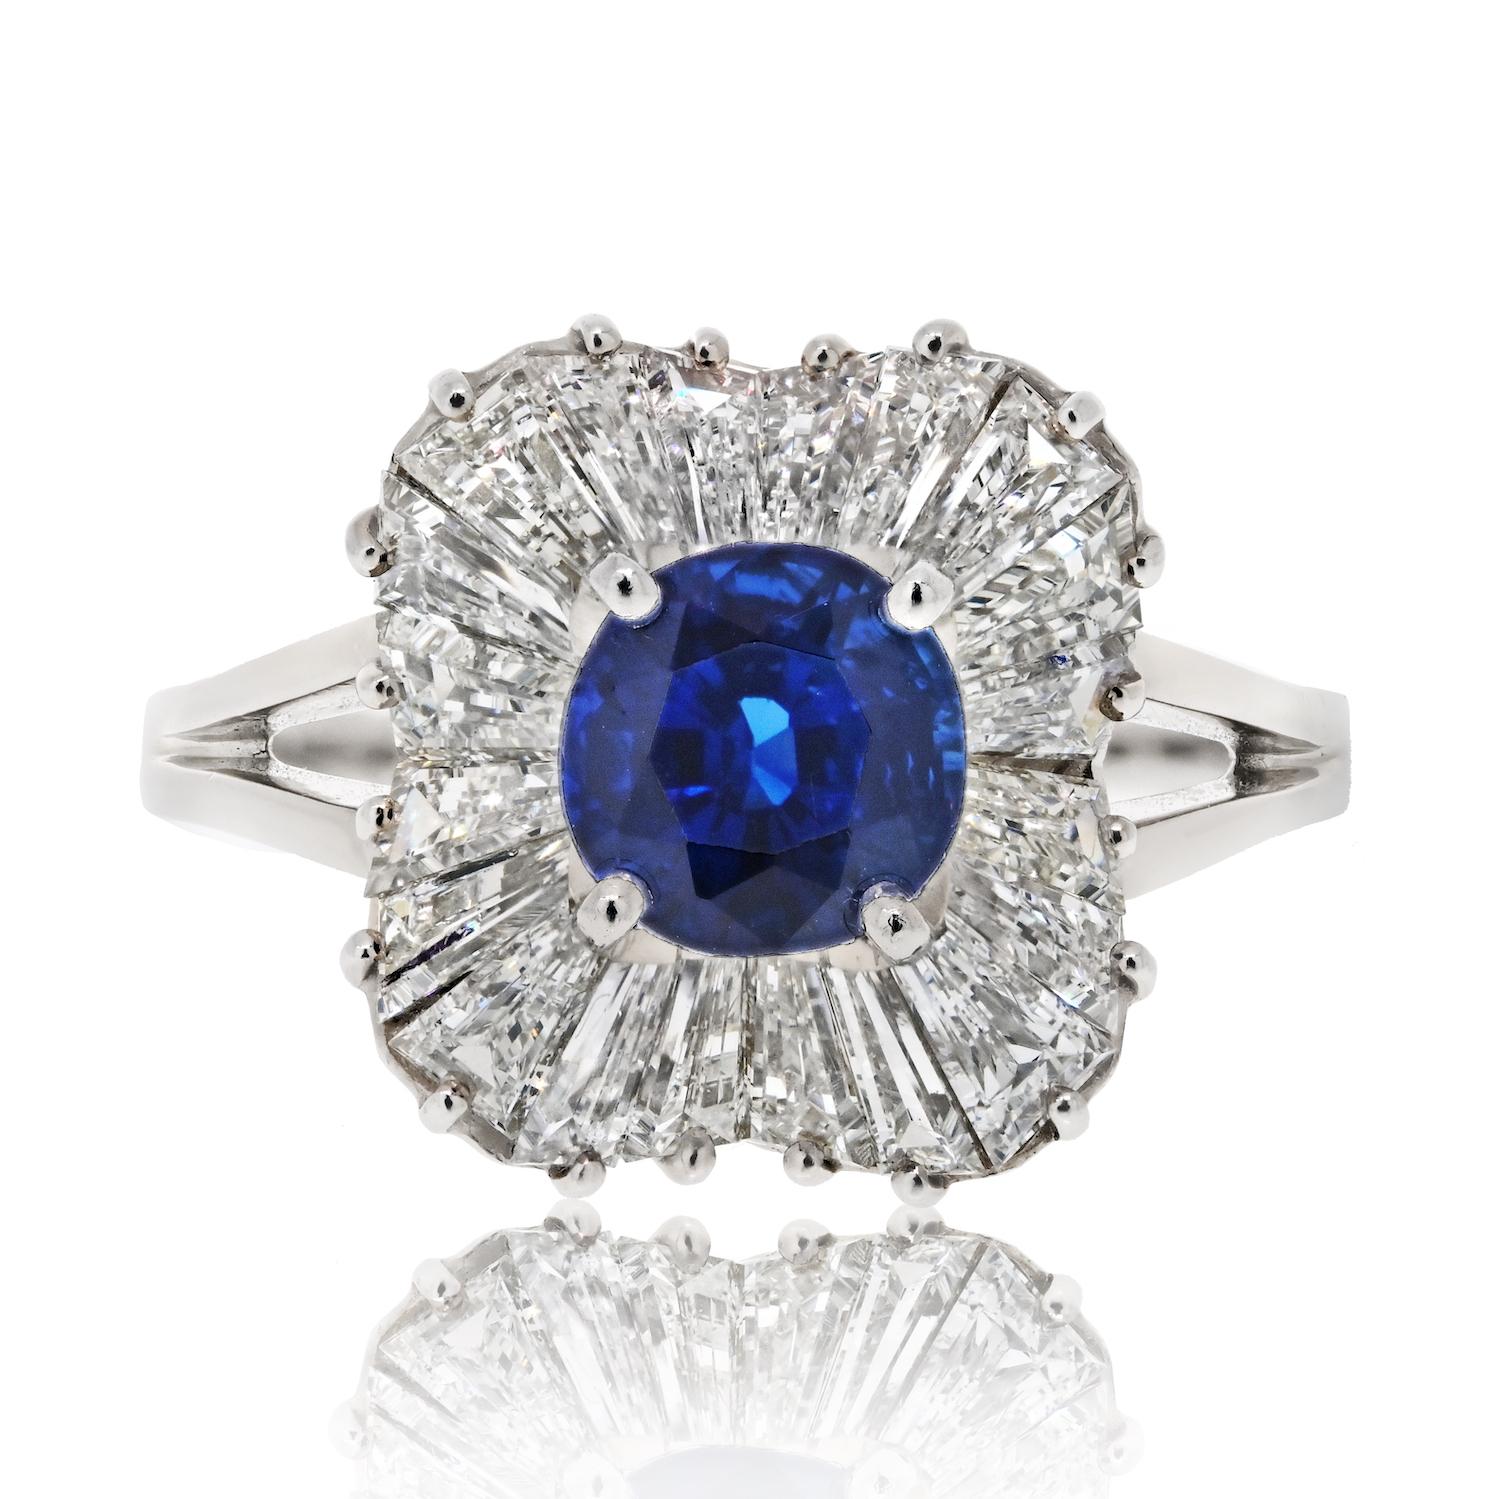 Elevate your style with the timeless elegance of this Oscar Heyman ballerina ring. The focal point is a stunning 1.99-carat cushion-cut sapphire that exudes deep, captivating blue hues. Surrounding the sapphire are 2.58 carats of baguette-cut